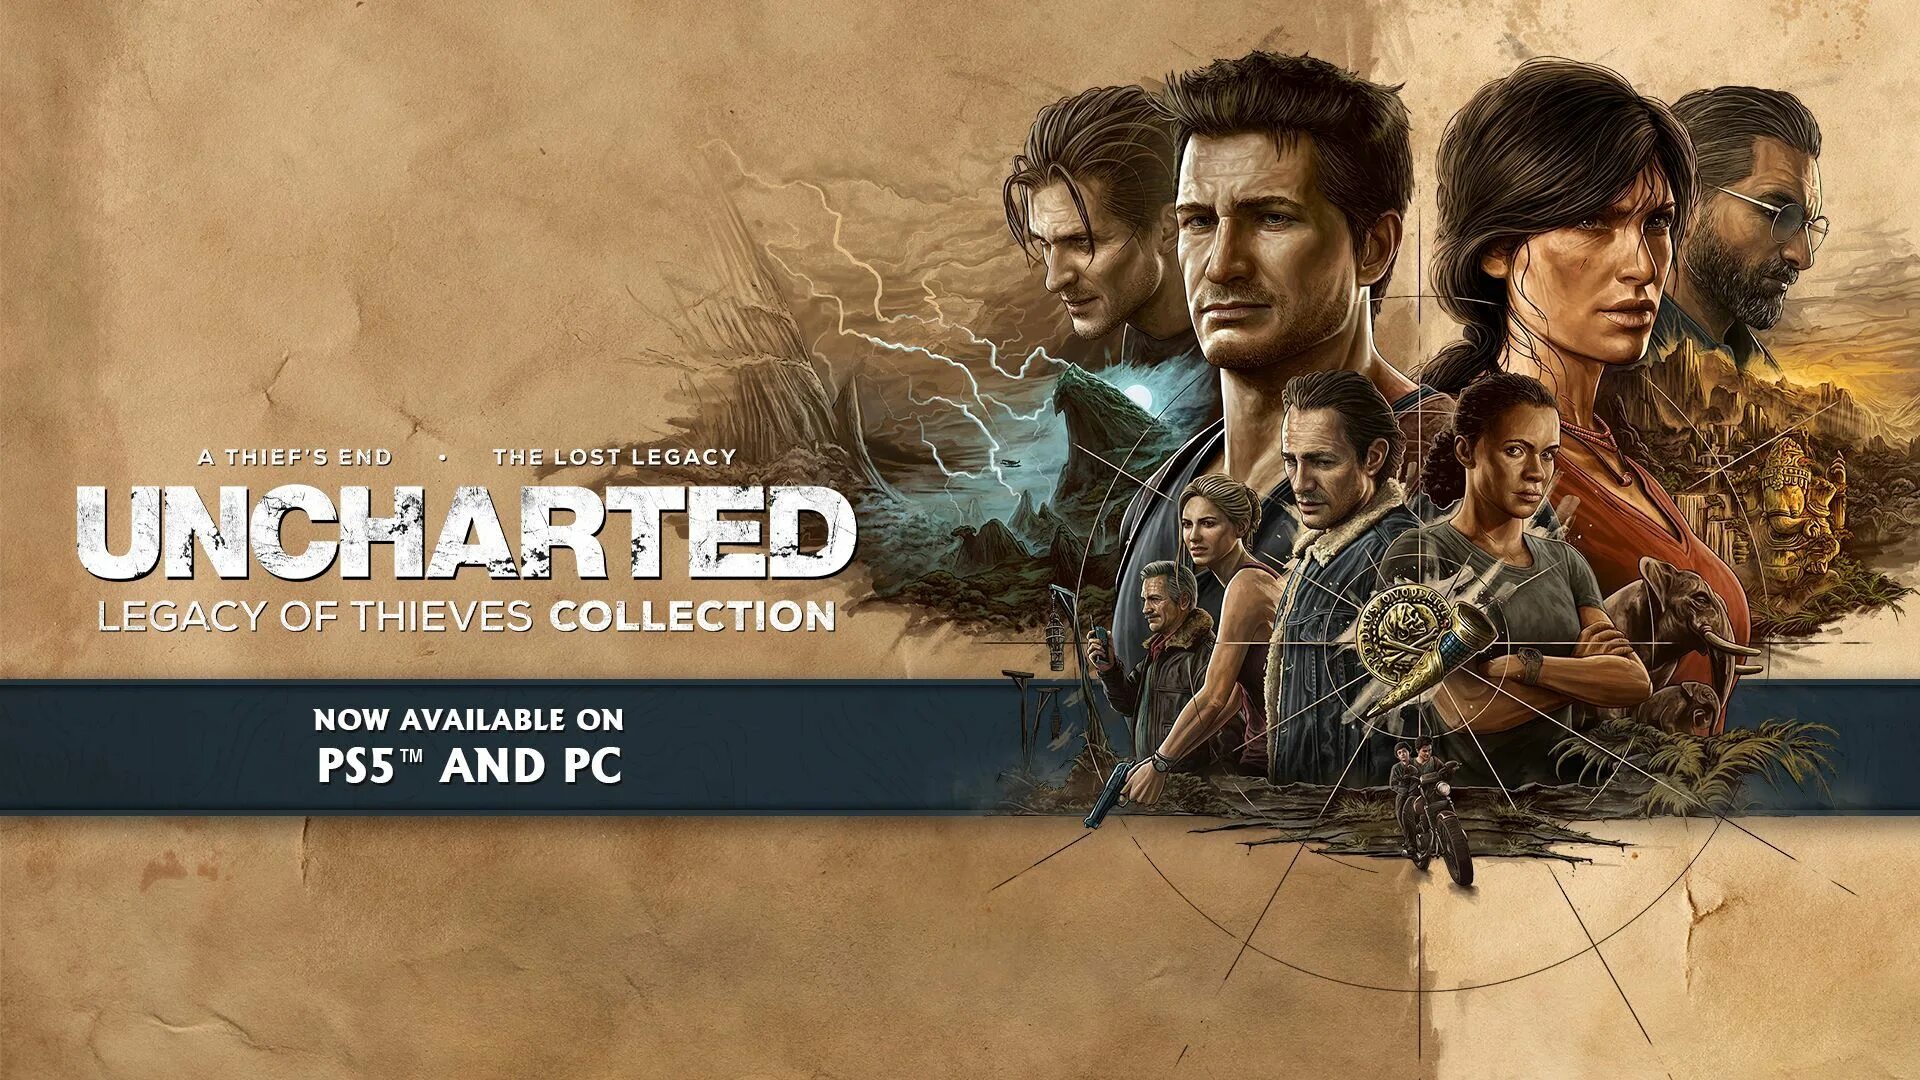 Uncharted thieves collection купить. Uncharted™: наследие воров. Legacy of Thieves collection. Uncharted на ПК. Uncharted Legacy of Thieves collection на ПК.